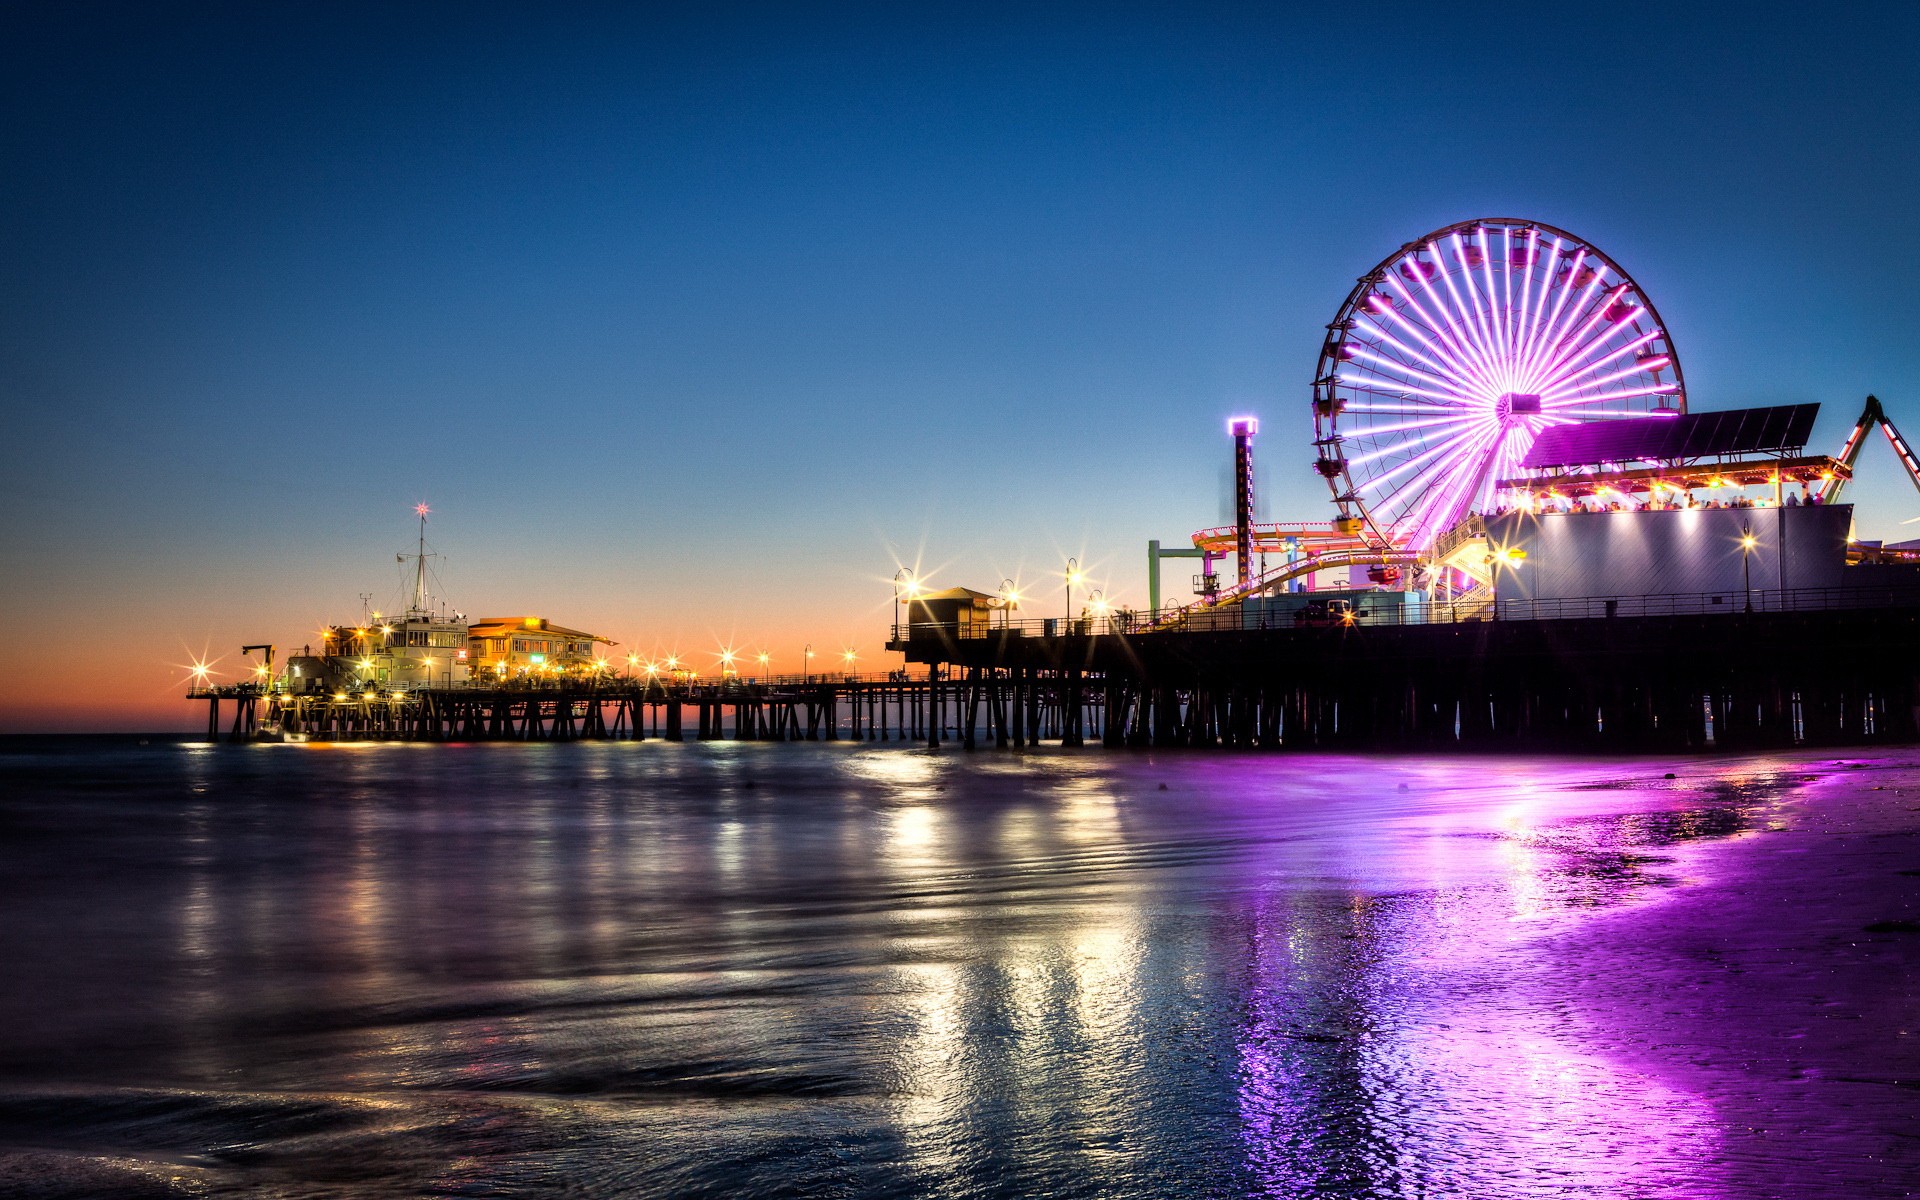 Los Angeles beach at night 1920 x 1200 Locality Photography